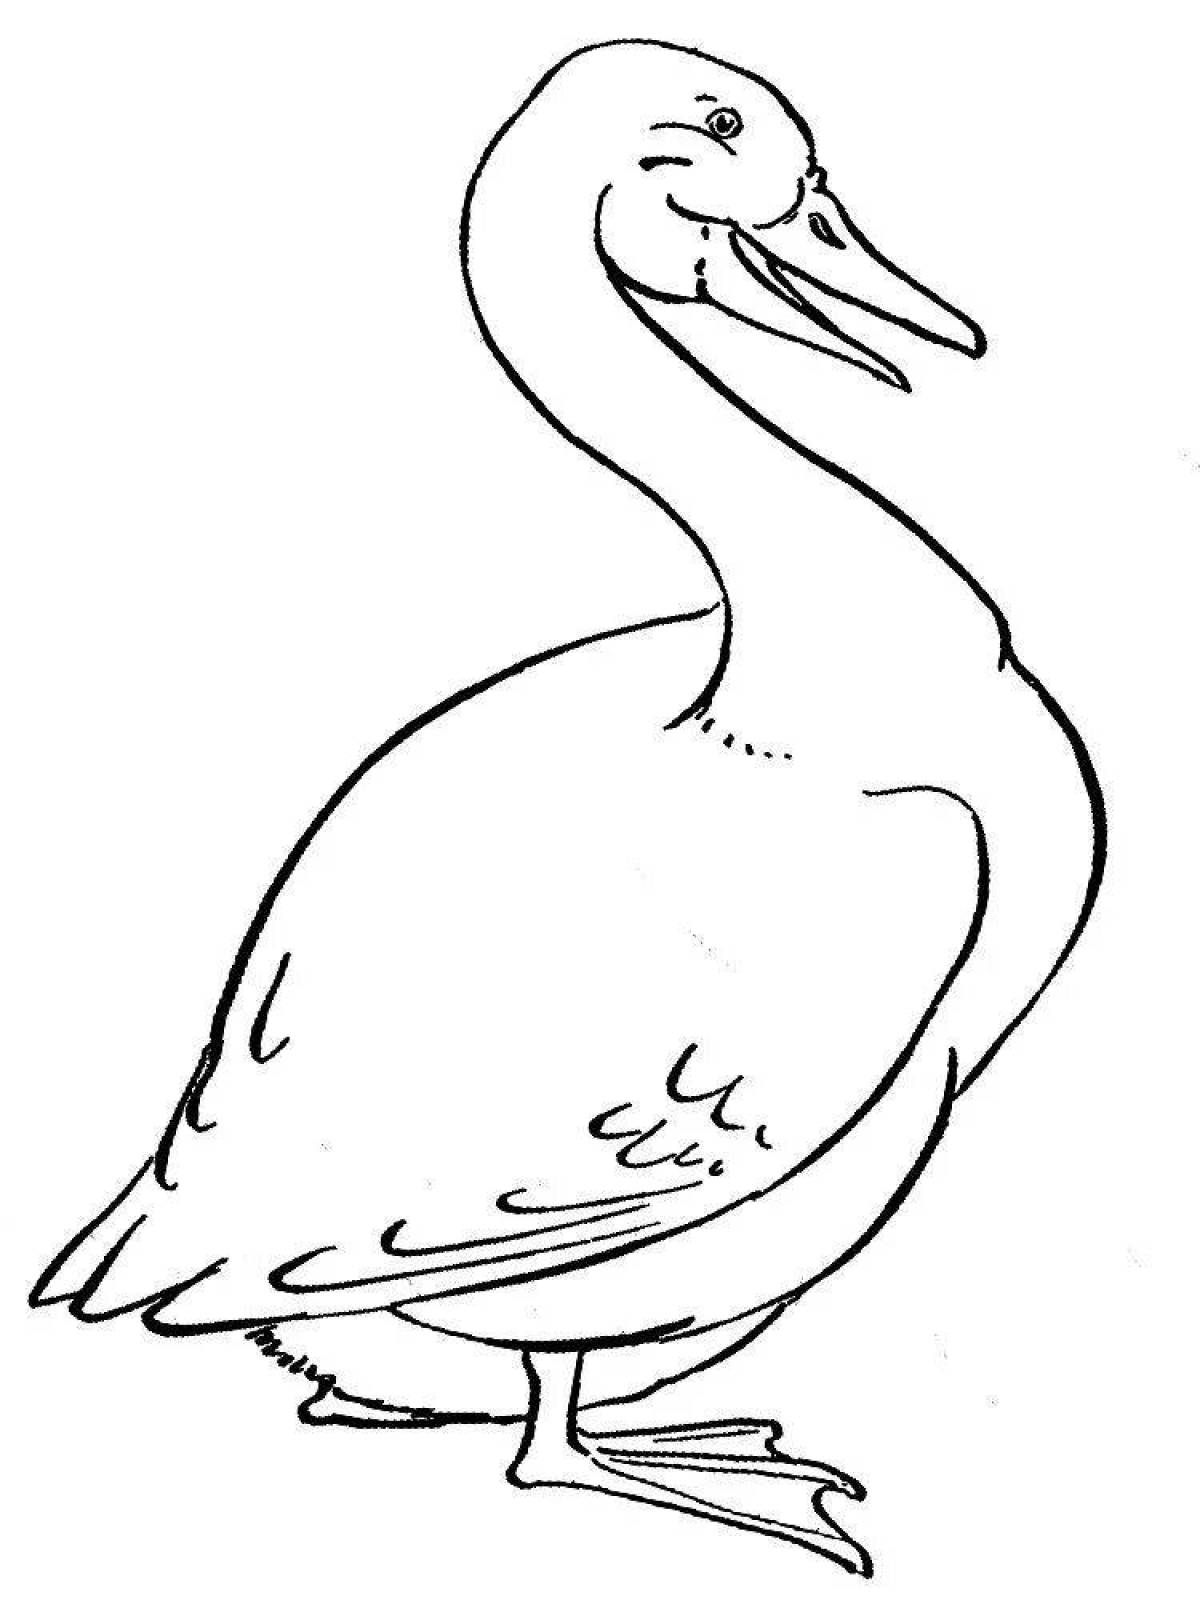 Snuggly goose hug coloring page